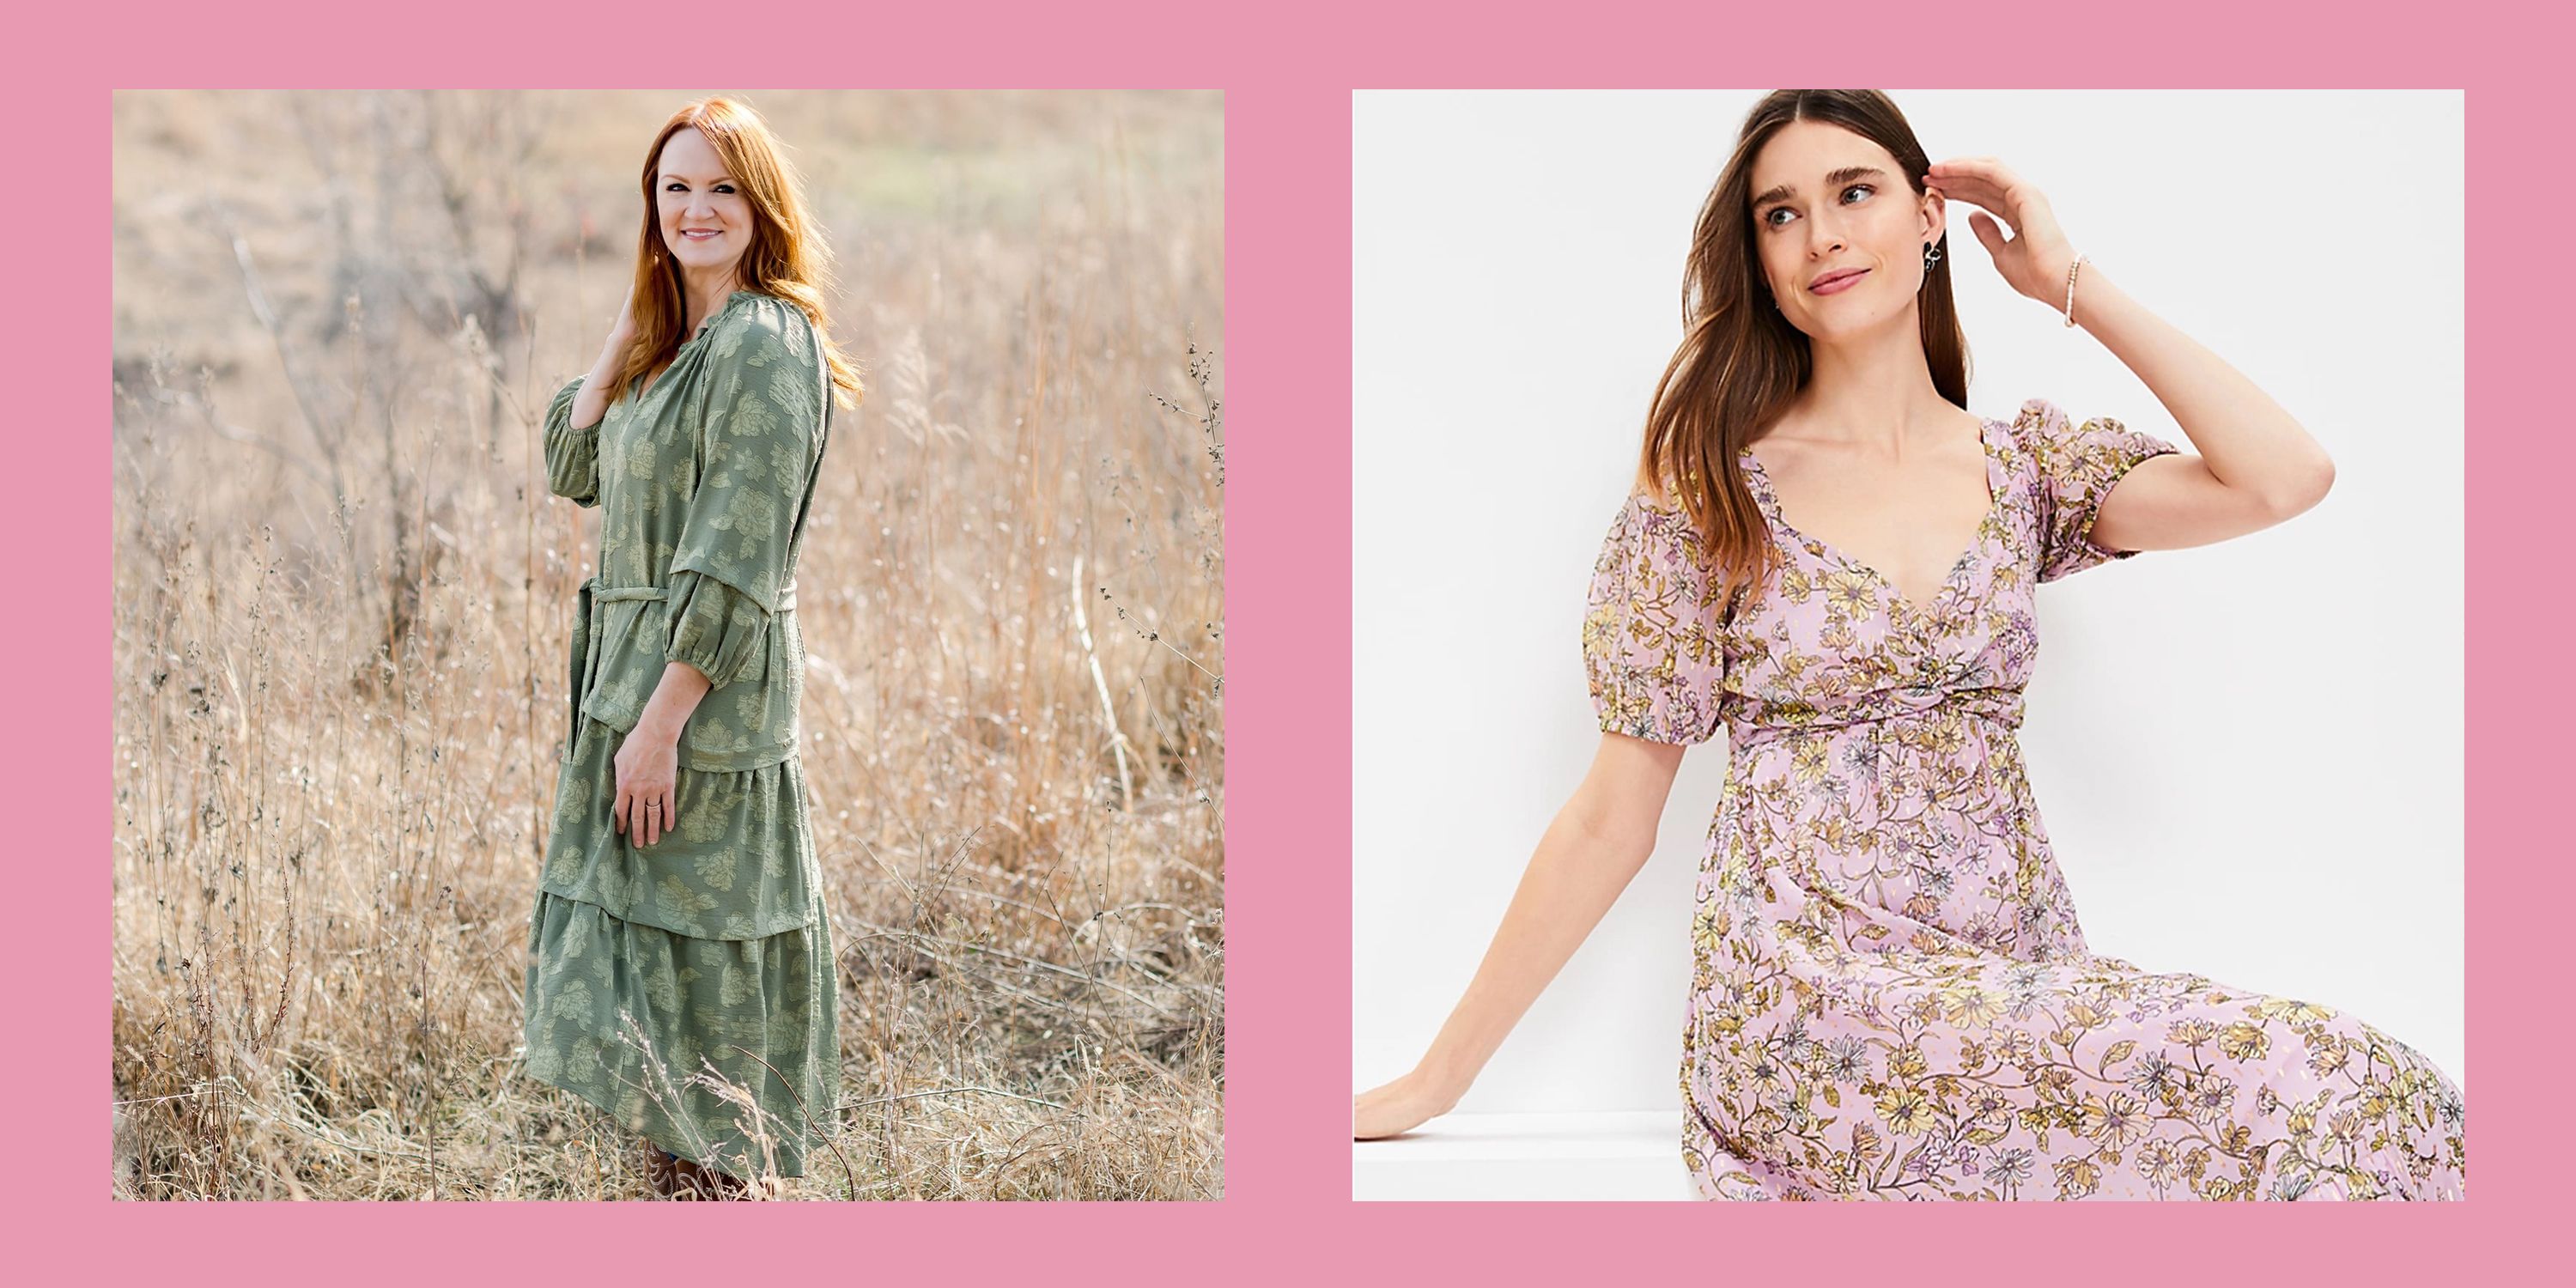 20 flowy spring dresses to put a pep in your step – including